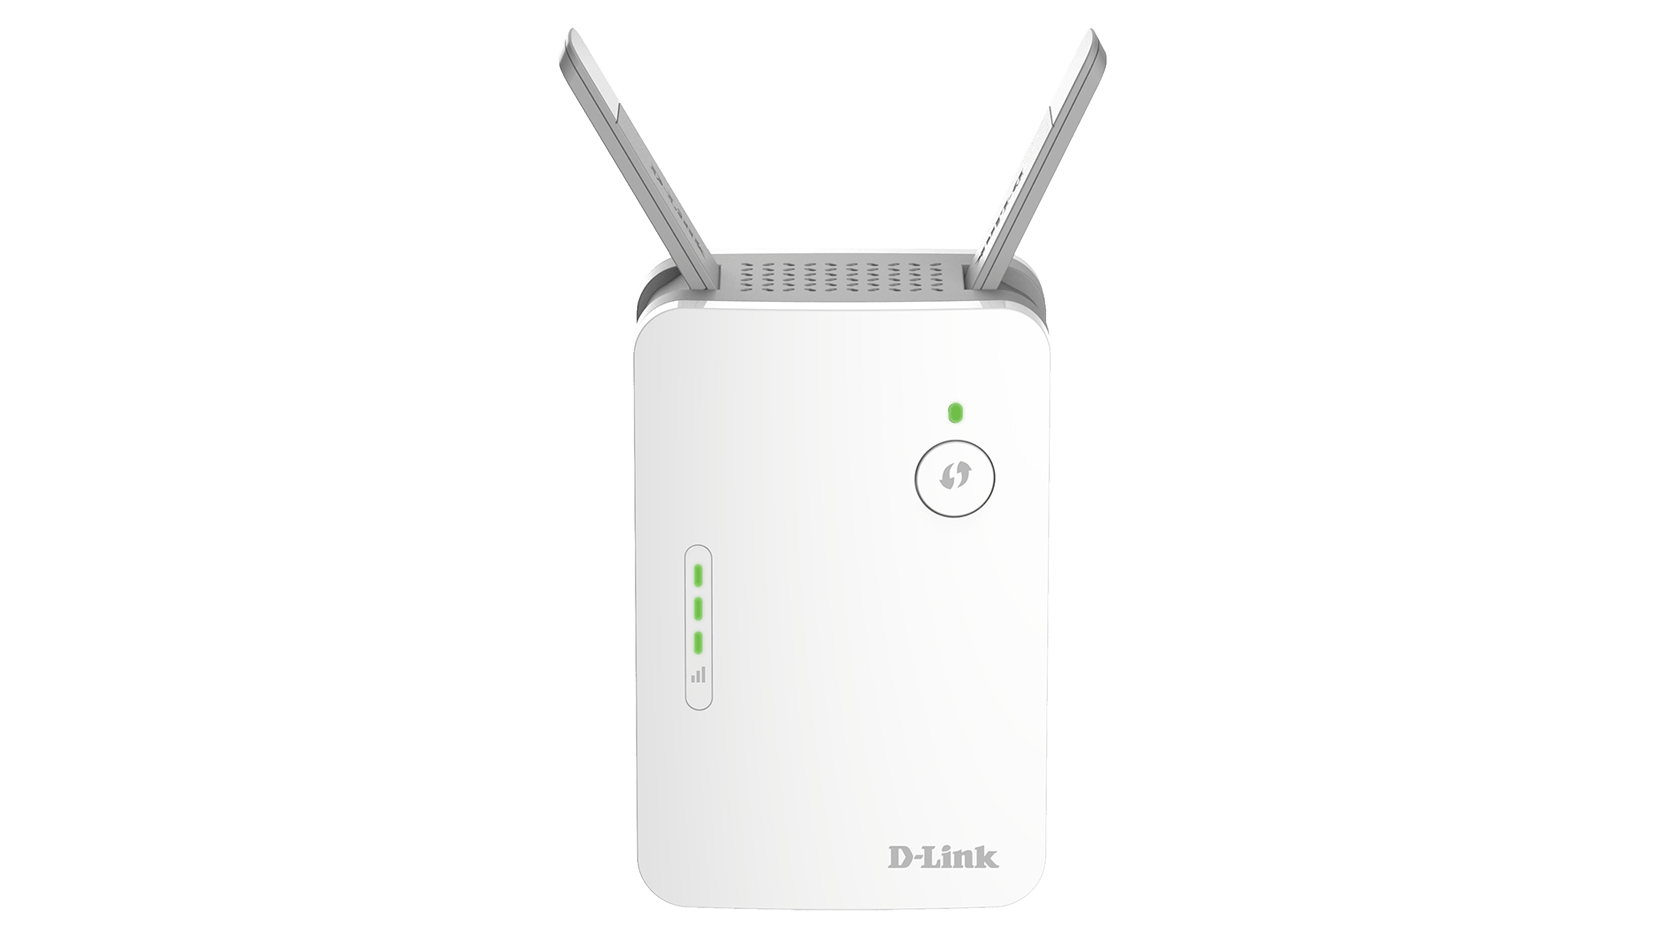 HOW TO RESET AND TROUBLESHOOT D-LINK ROUTER EXTENDER